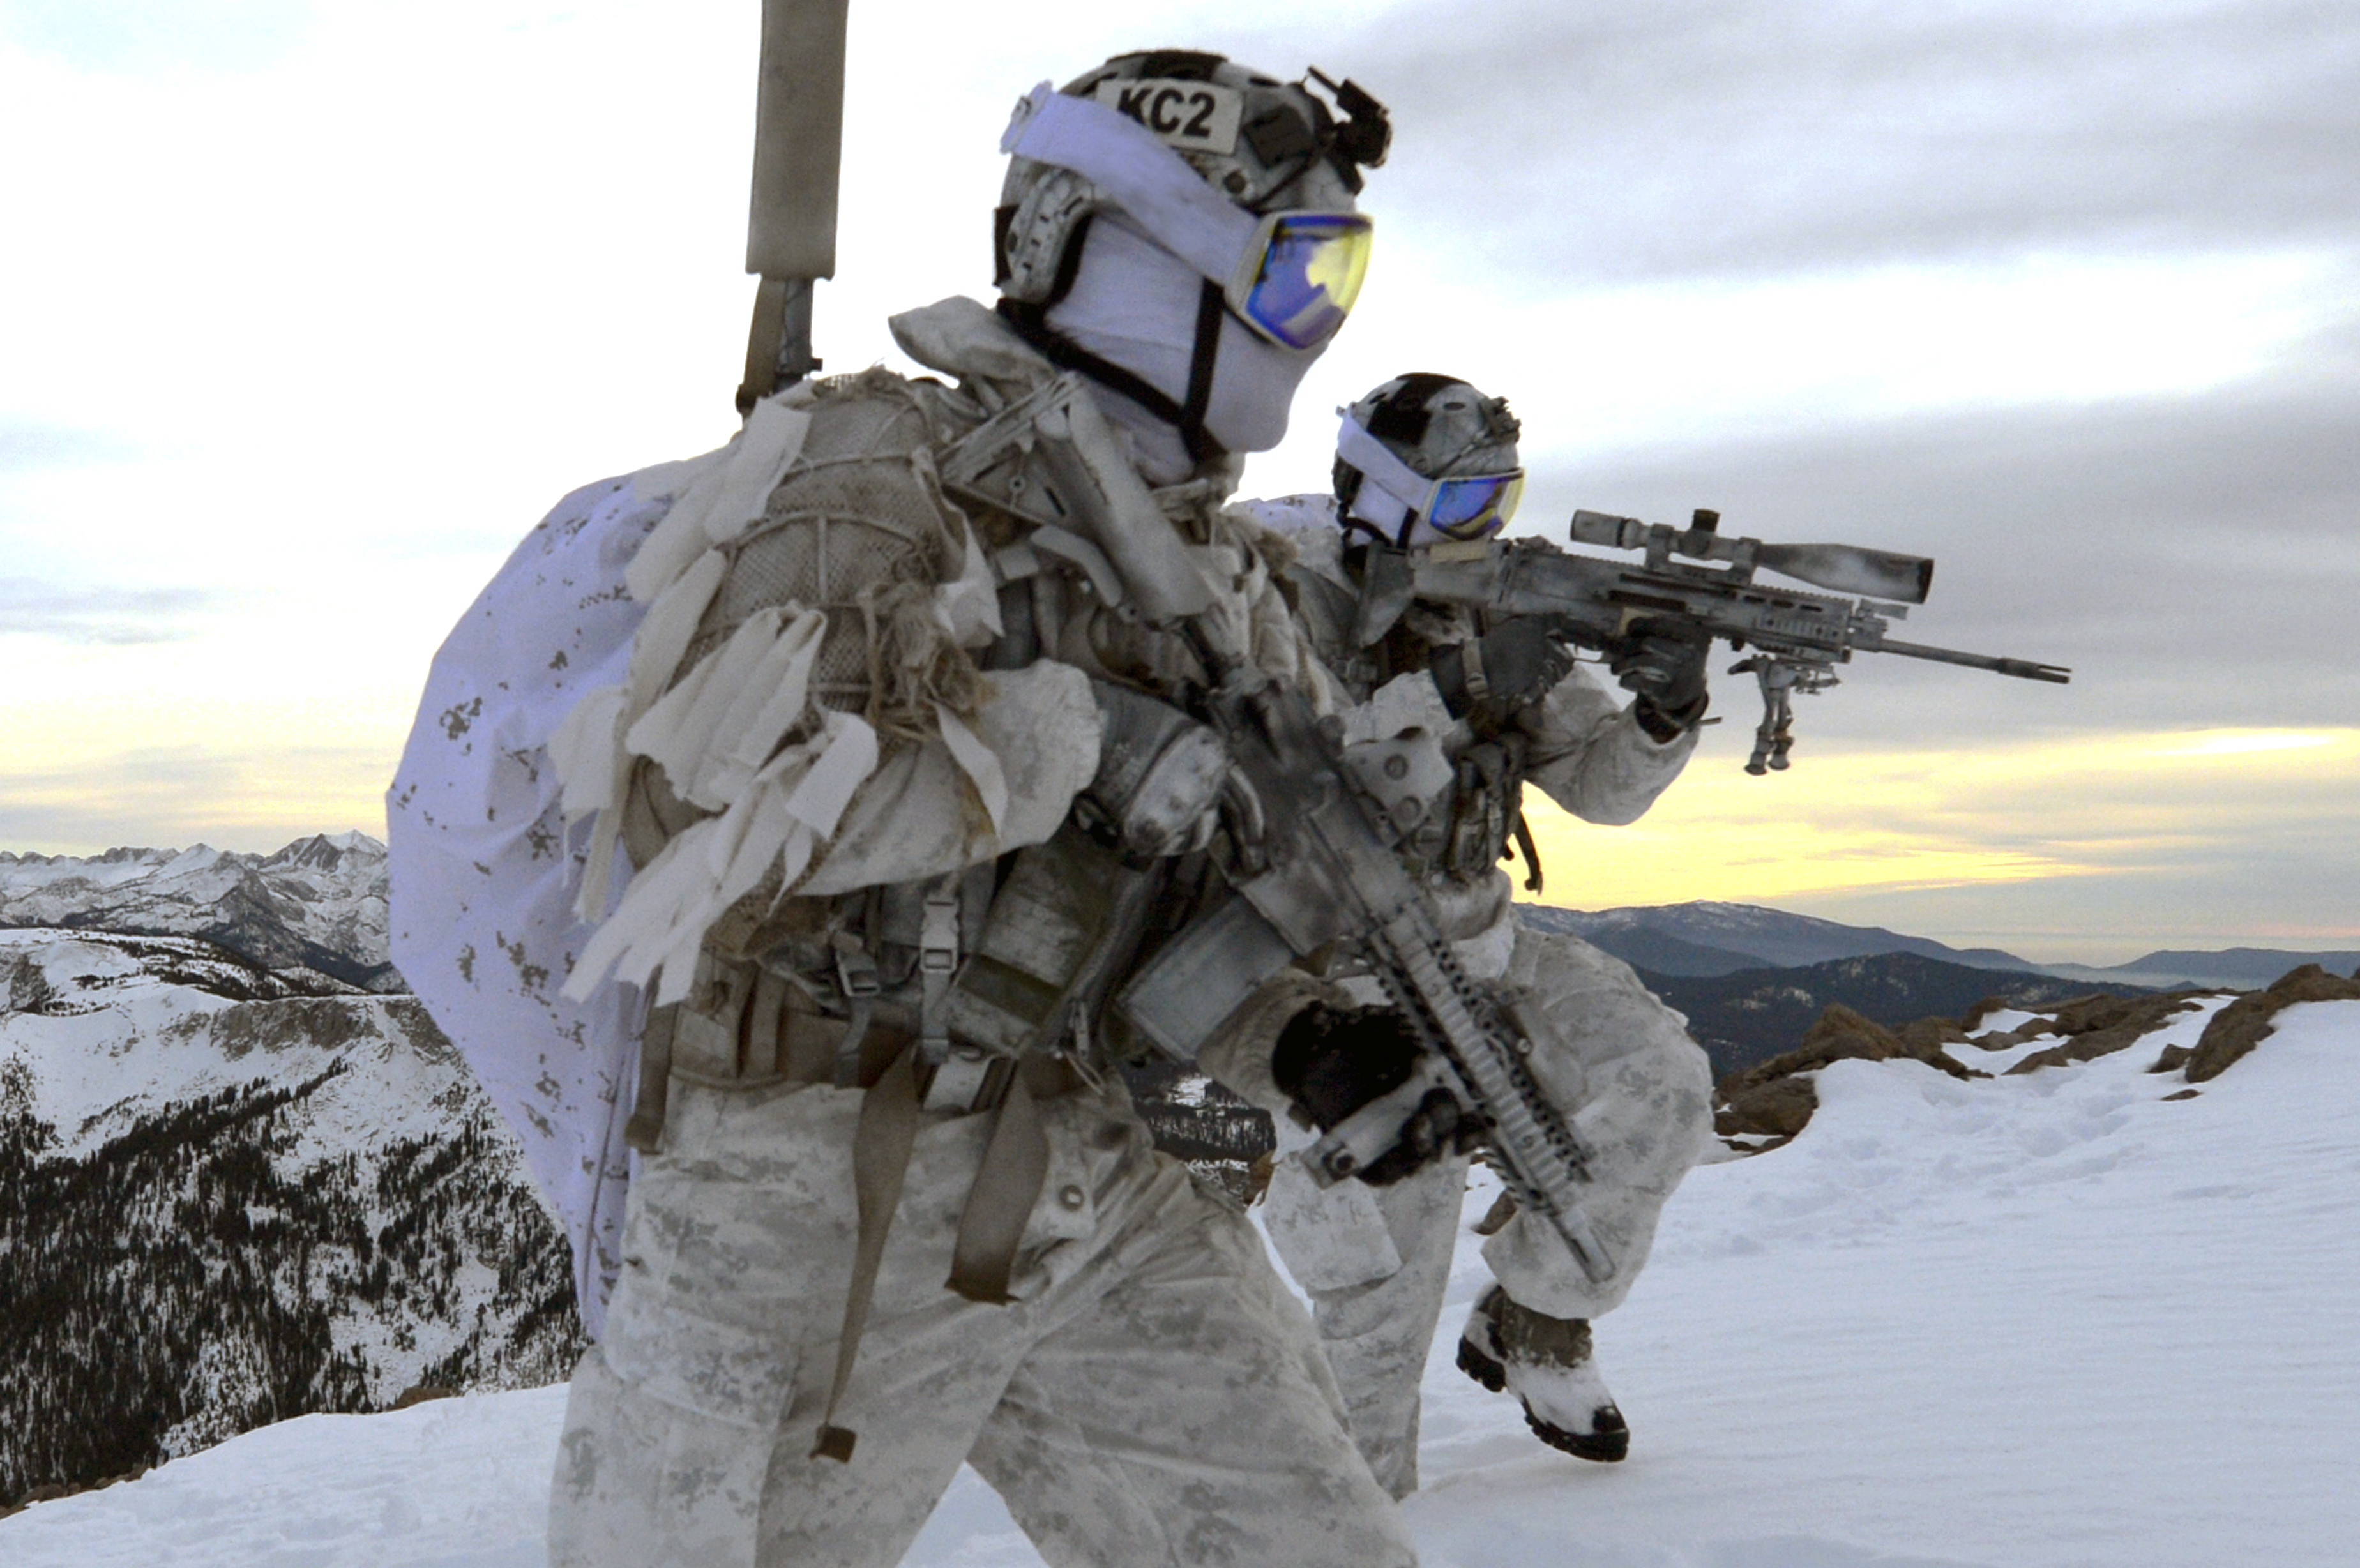 Navy Seal Photo - Winter Gear Future Soldier , HD Wallpaper & Backgrounds